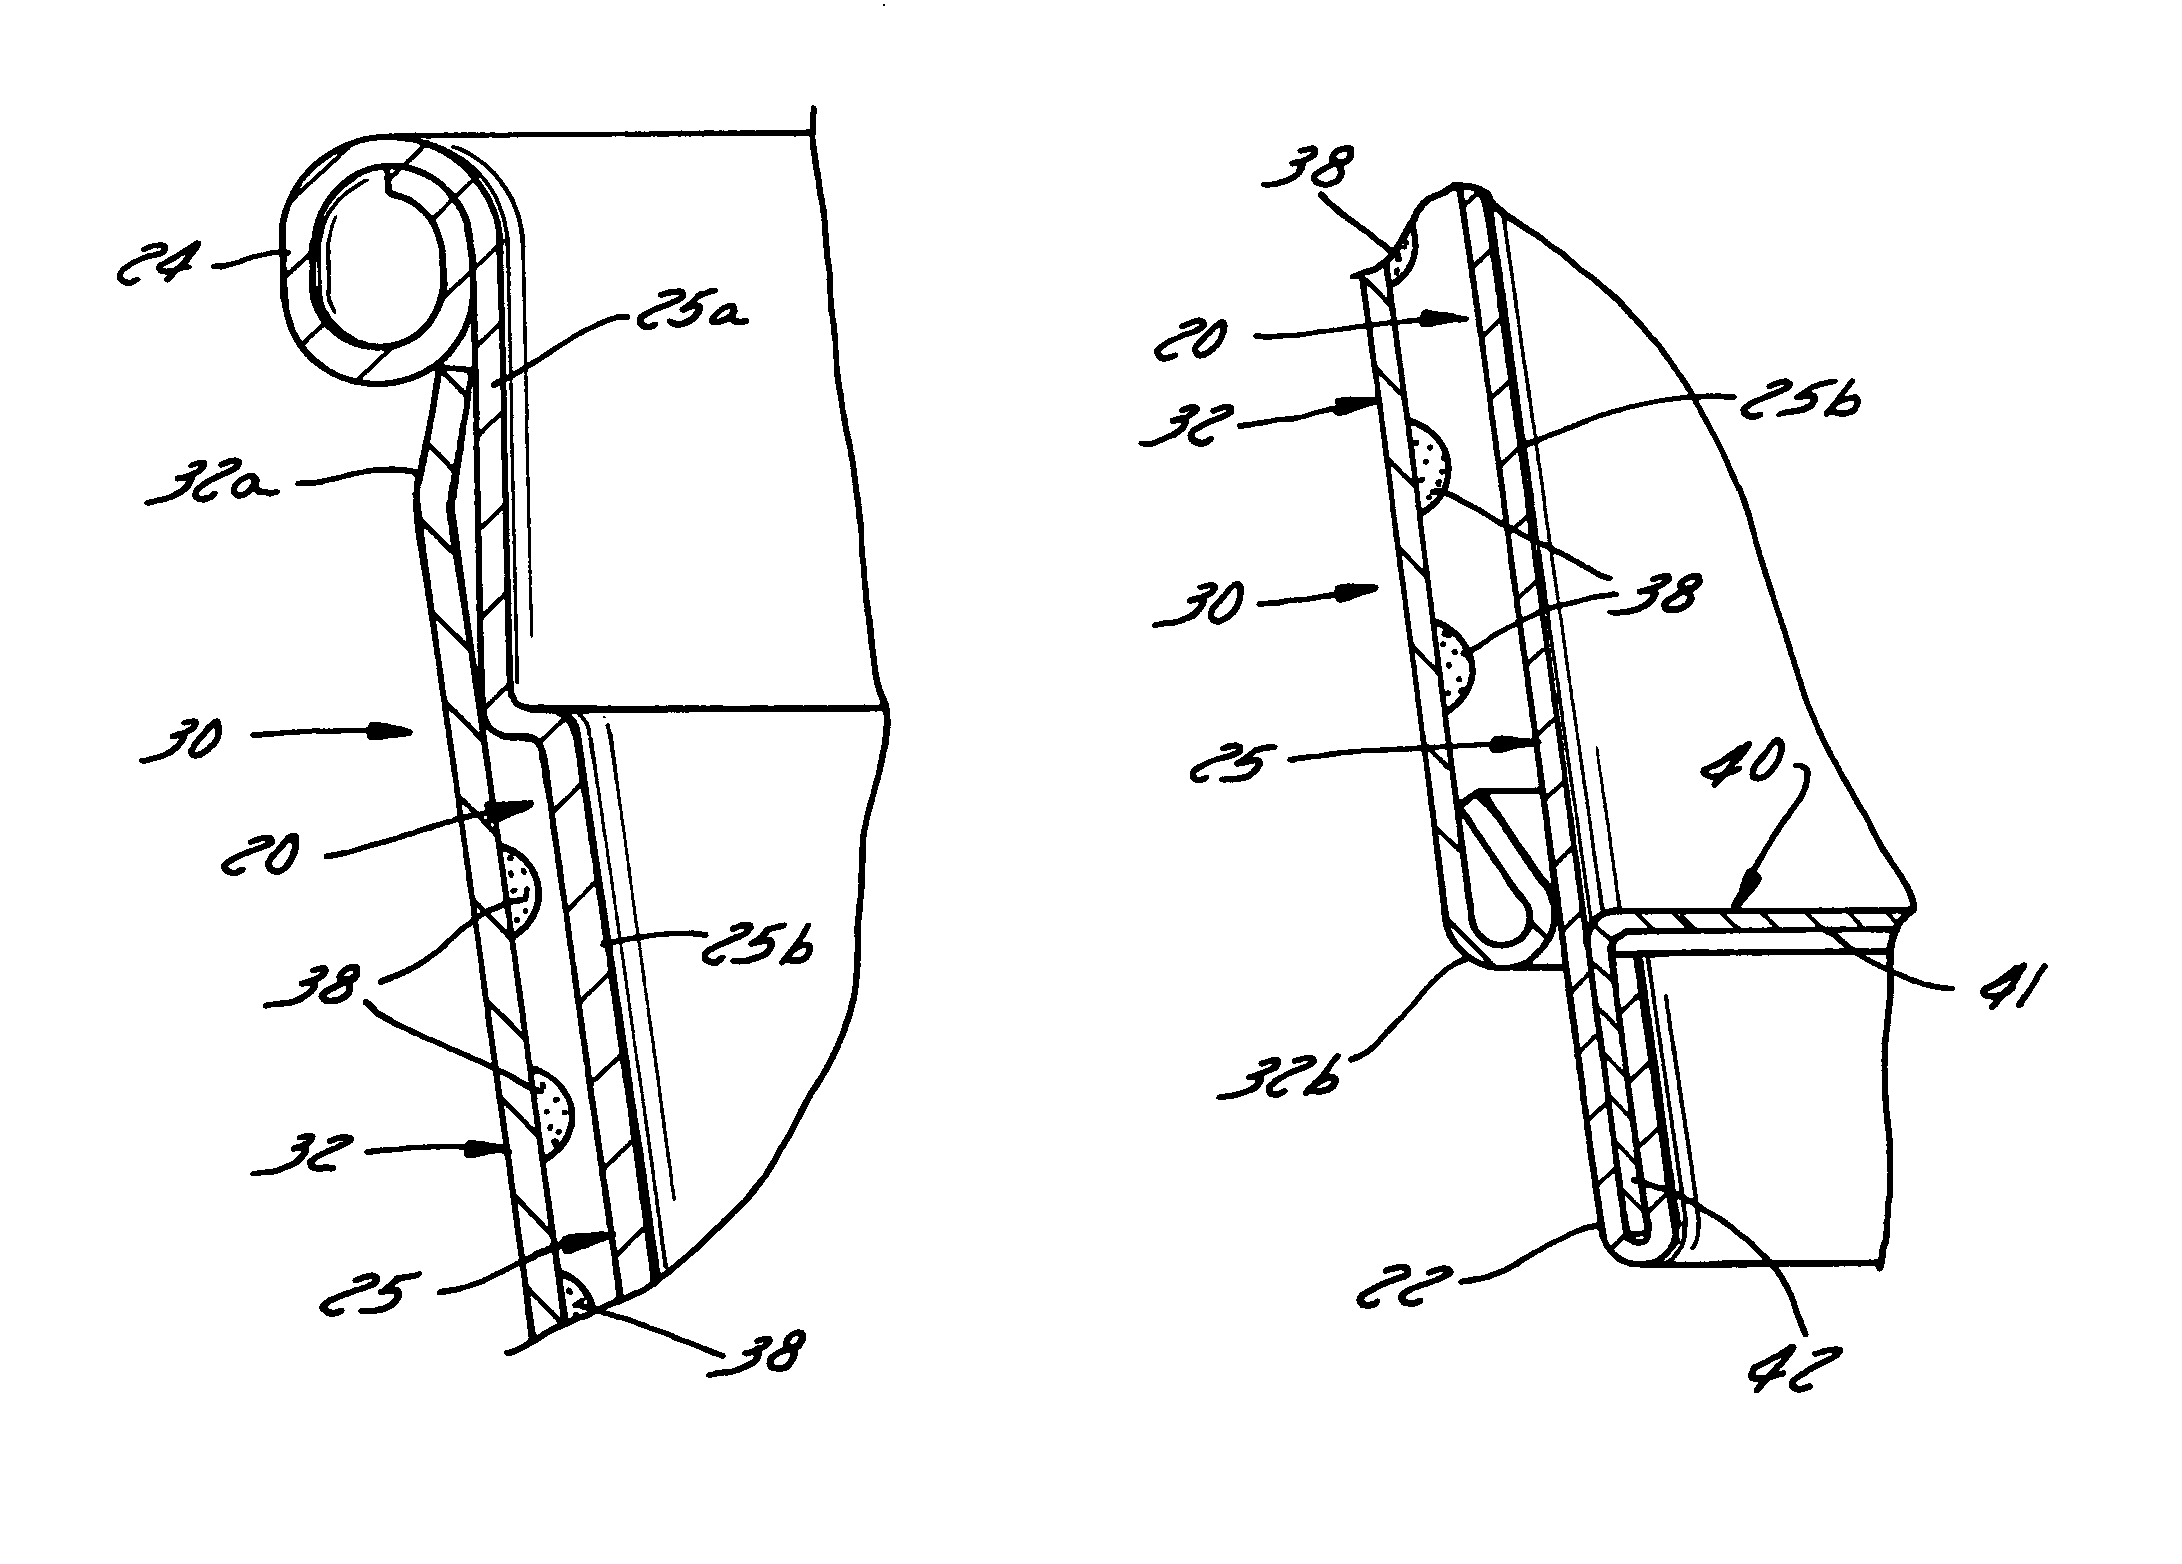 Double wall container with internal spacer